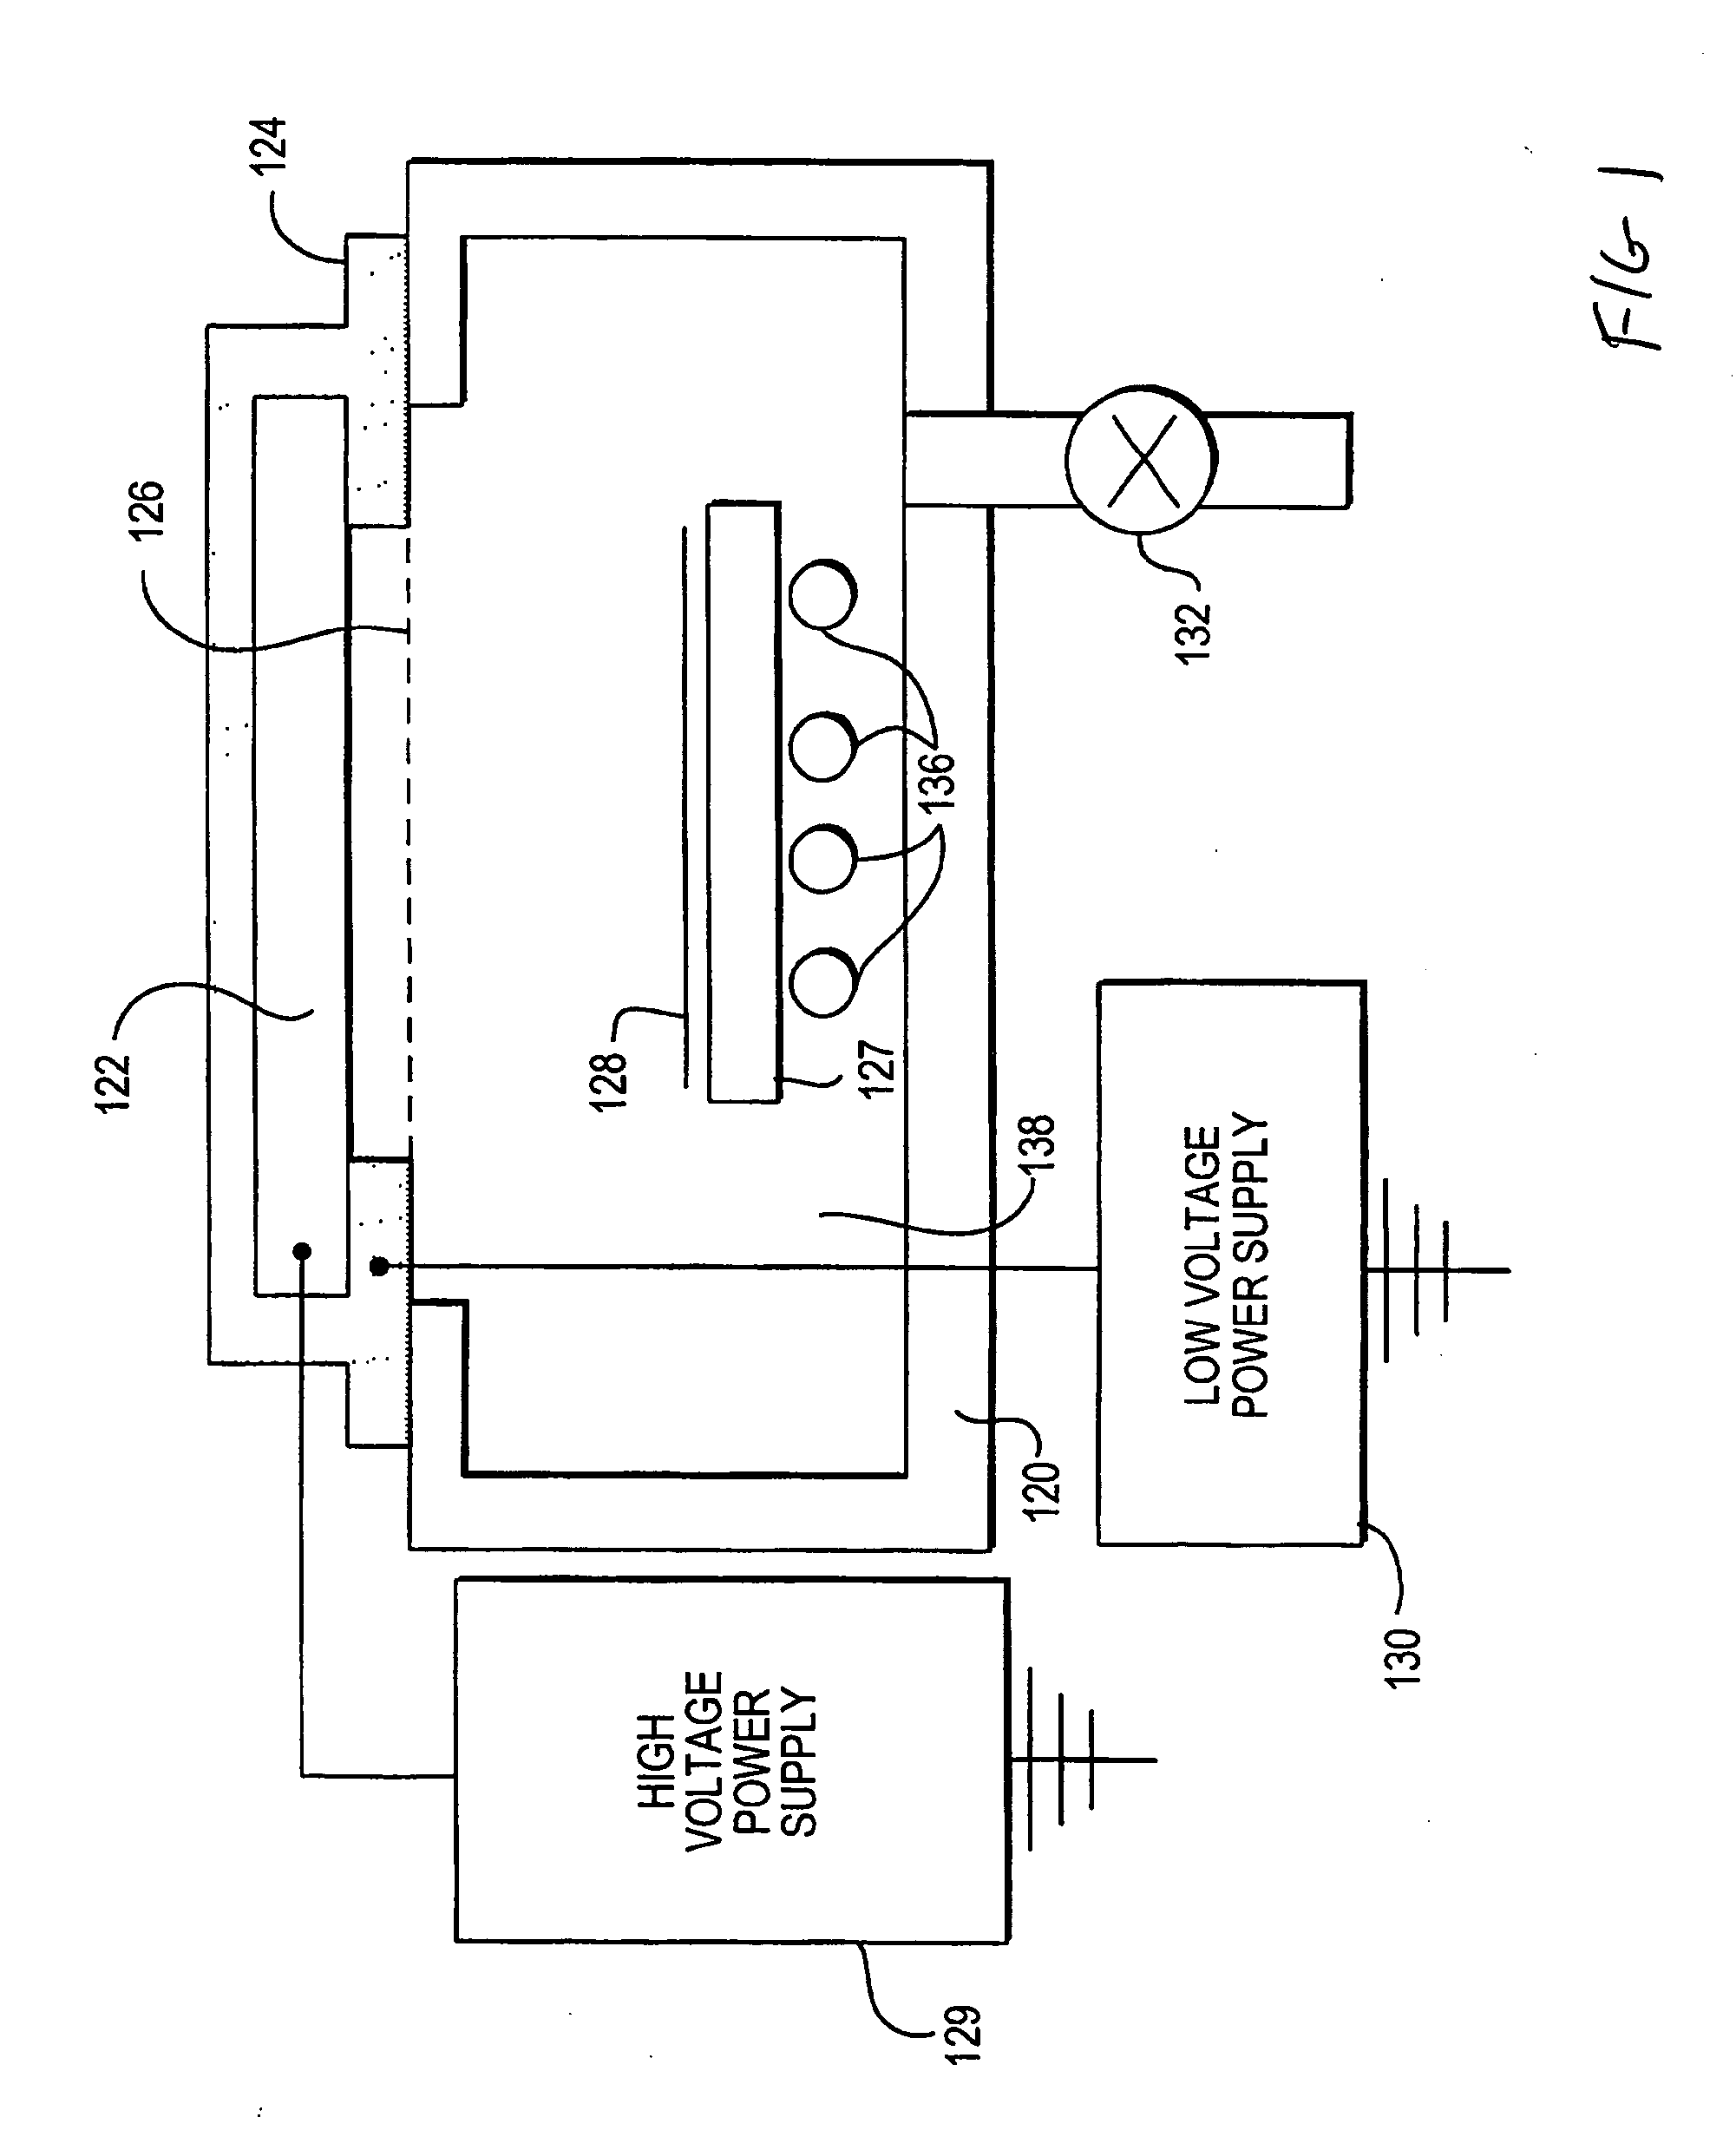 Electron beam method and apparatus for improved melt point temperatures and optical clarity of halogenated optical materials